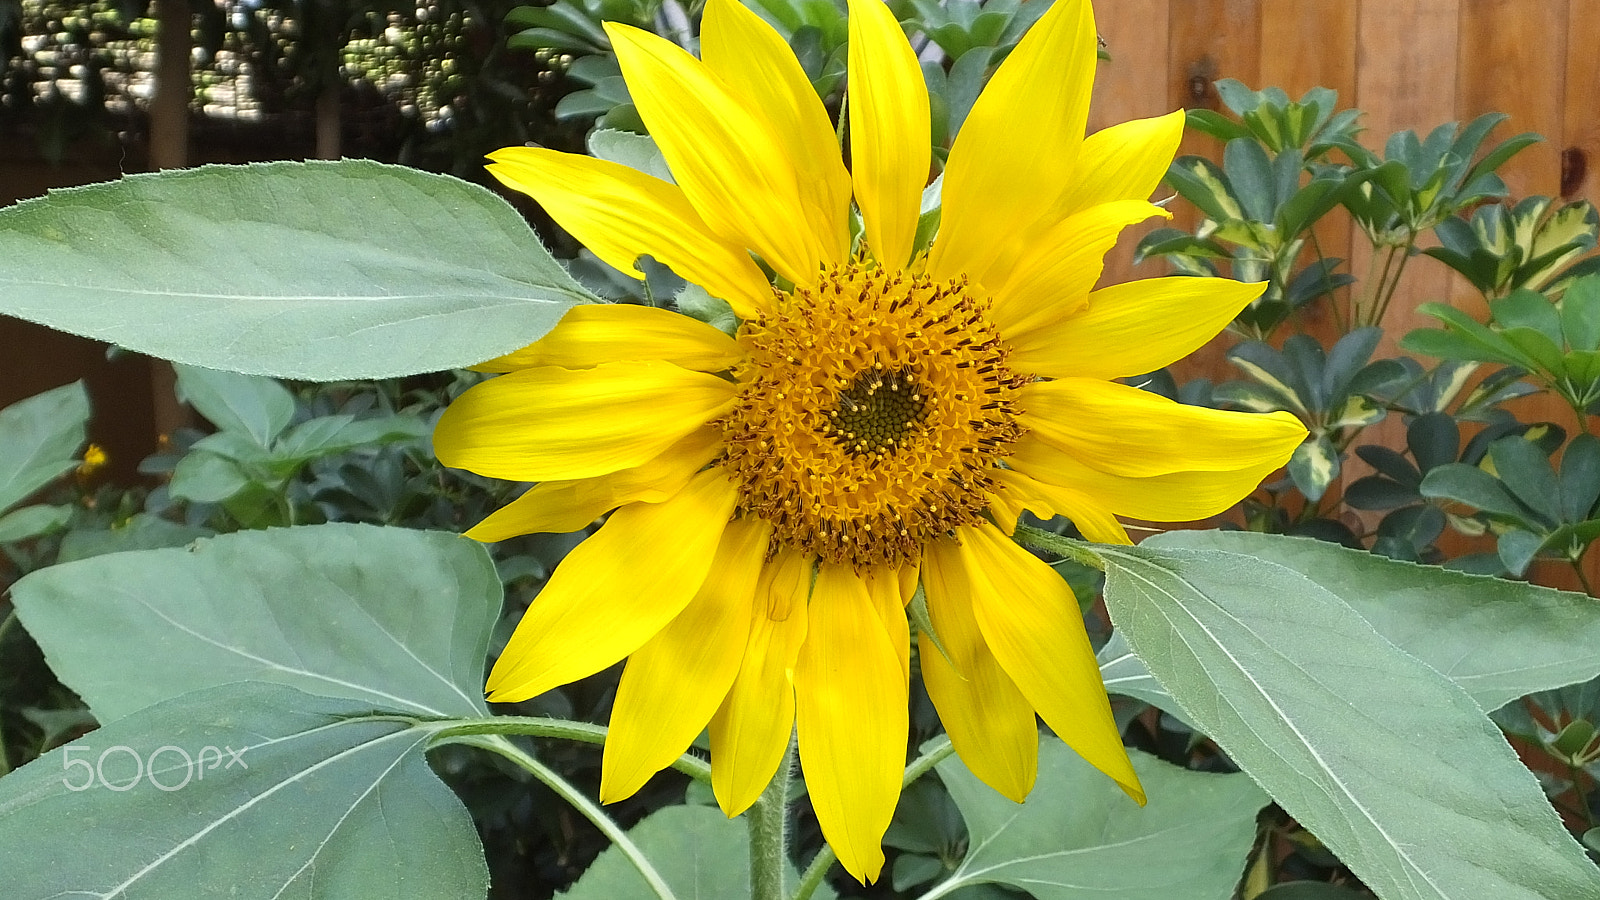 Fujifilm FinePix HS50 EXR sample photo. First sunflower photography